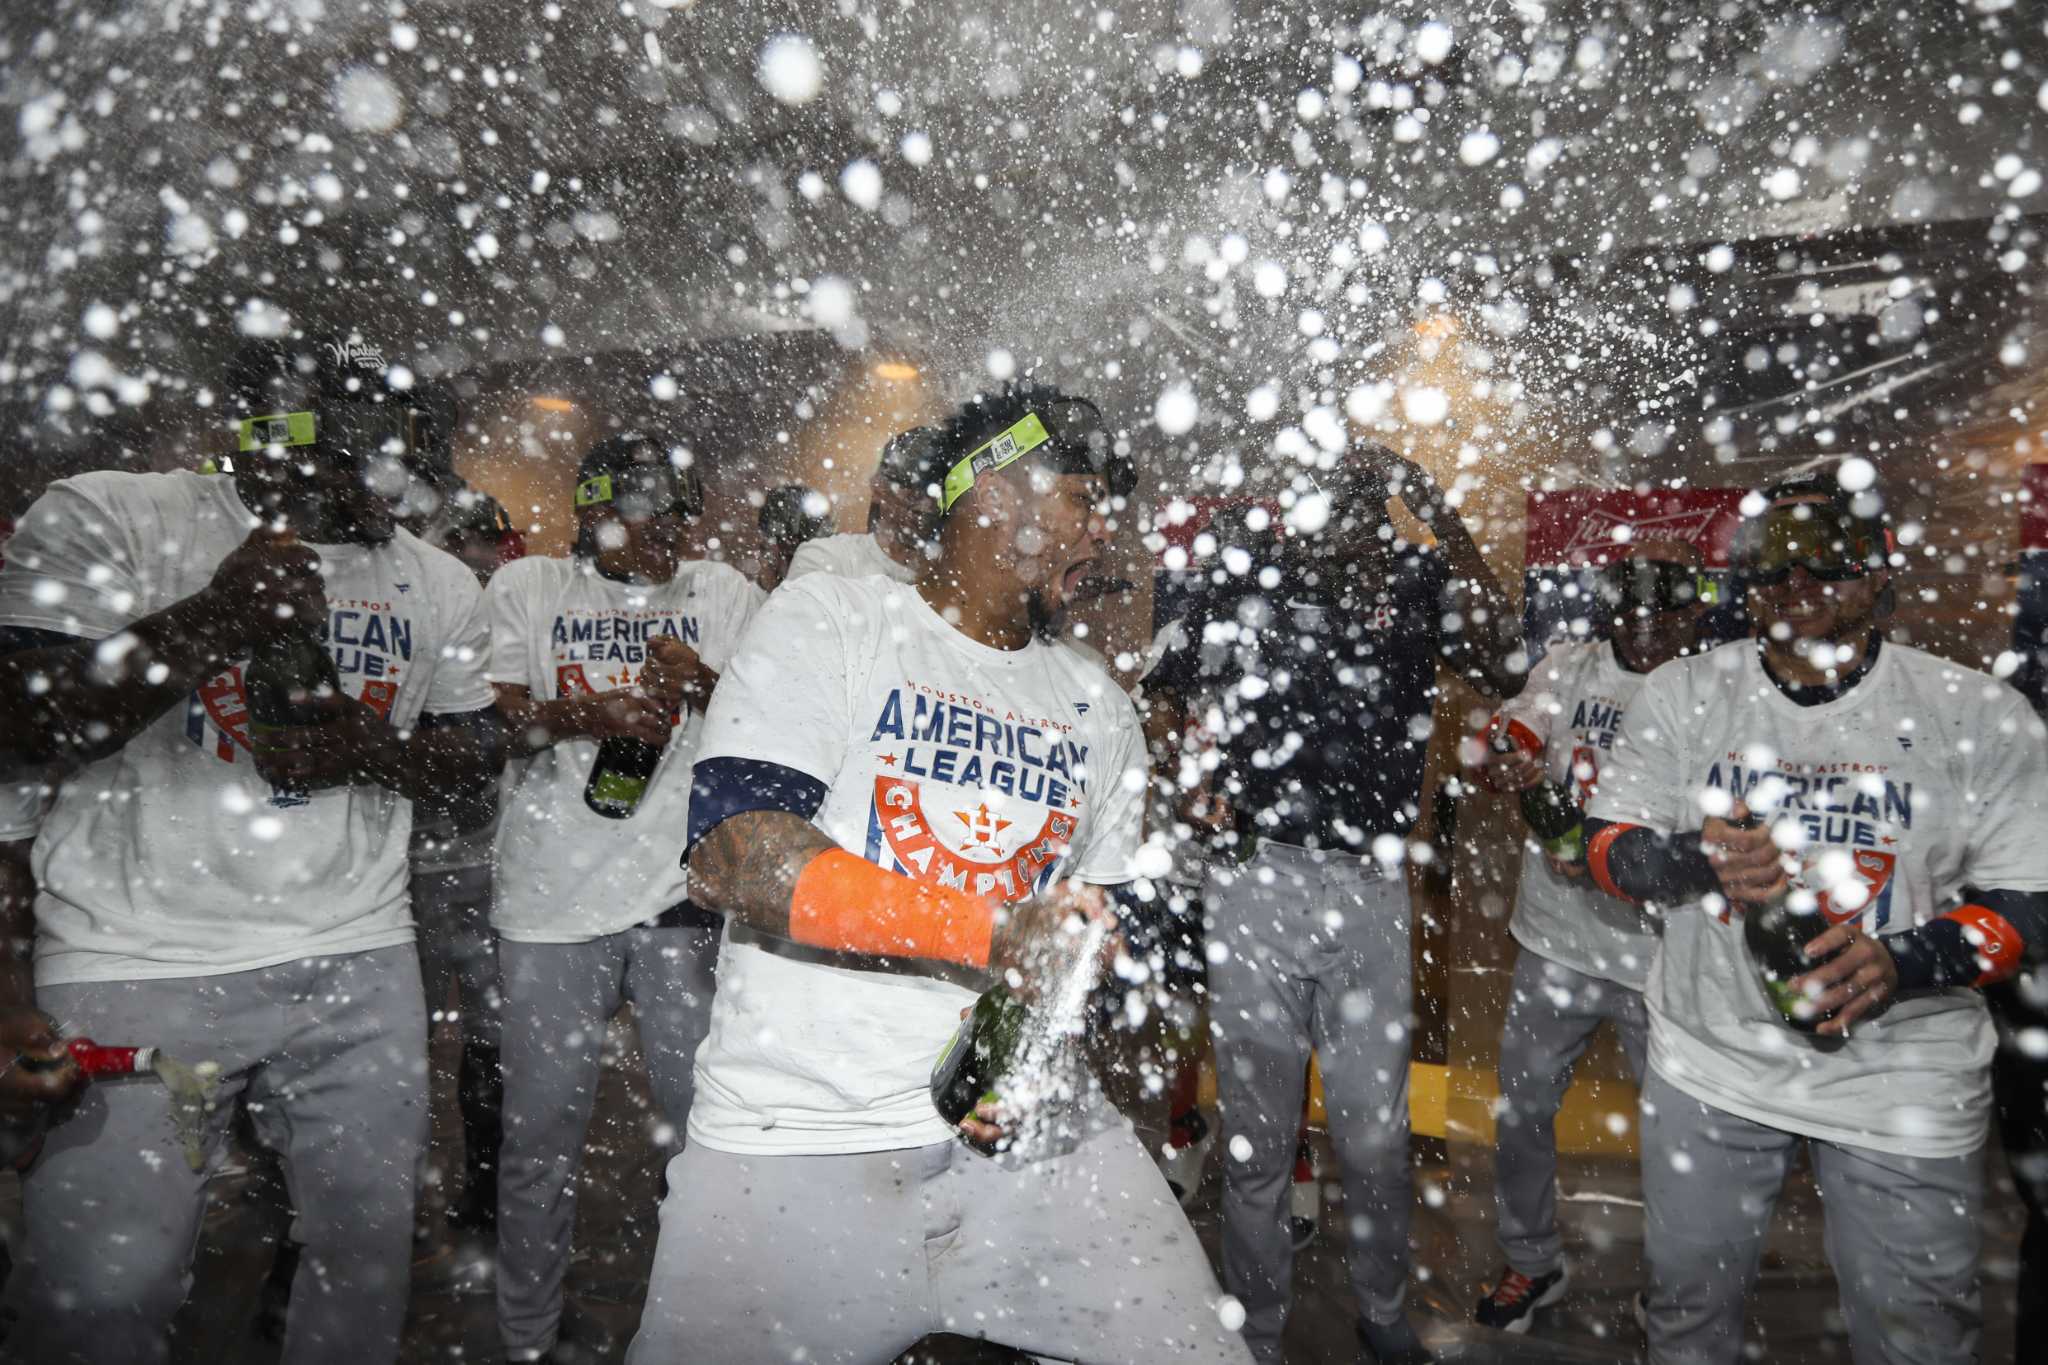 Astros celebrate division clincher in champagne-soaked clubhouse